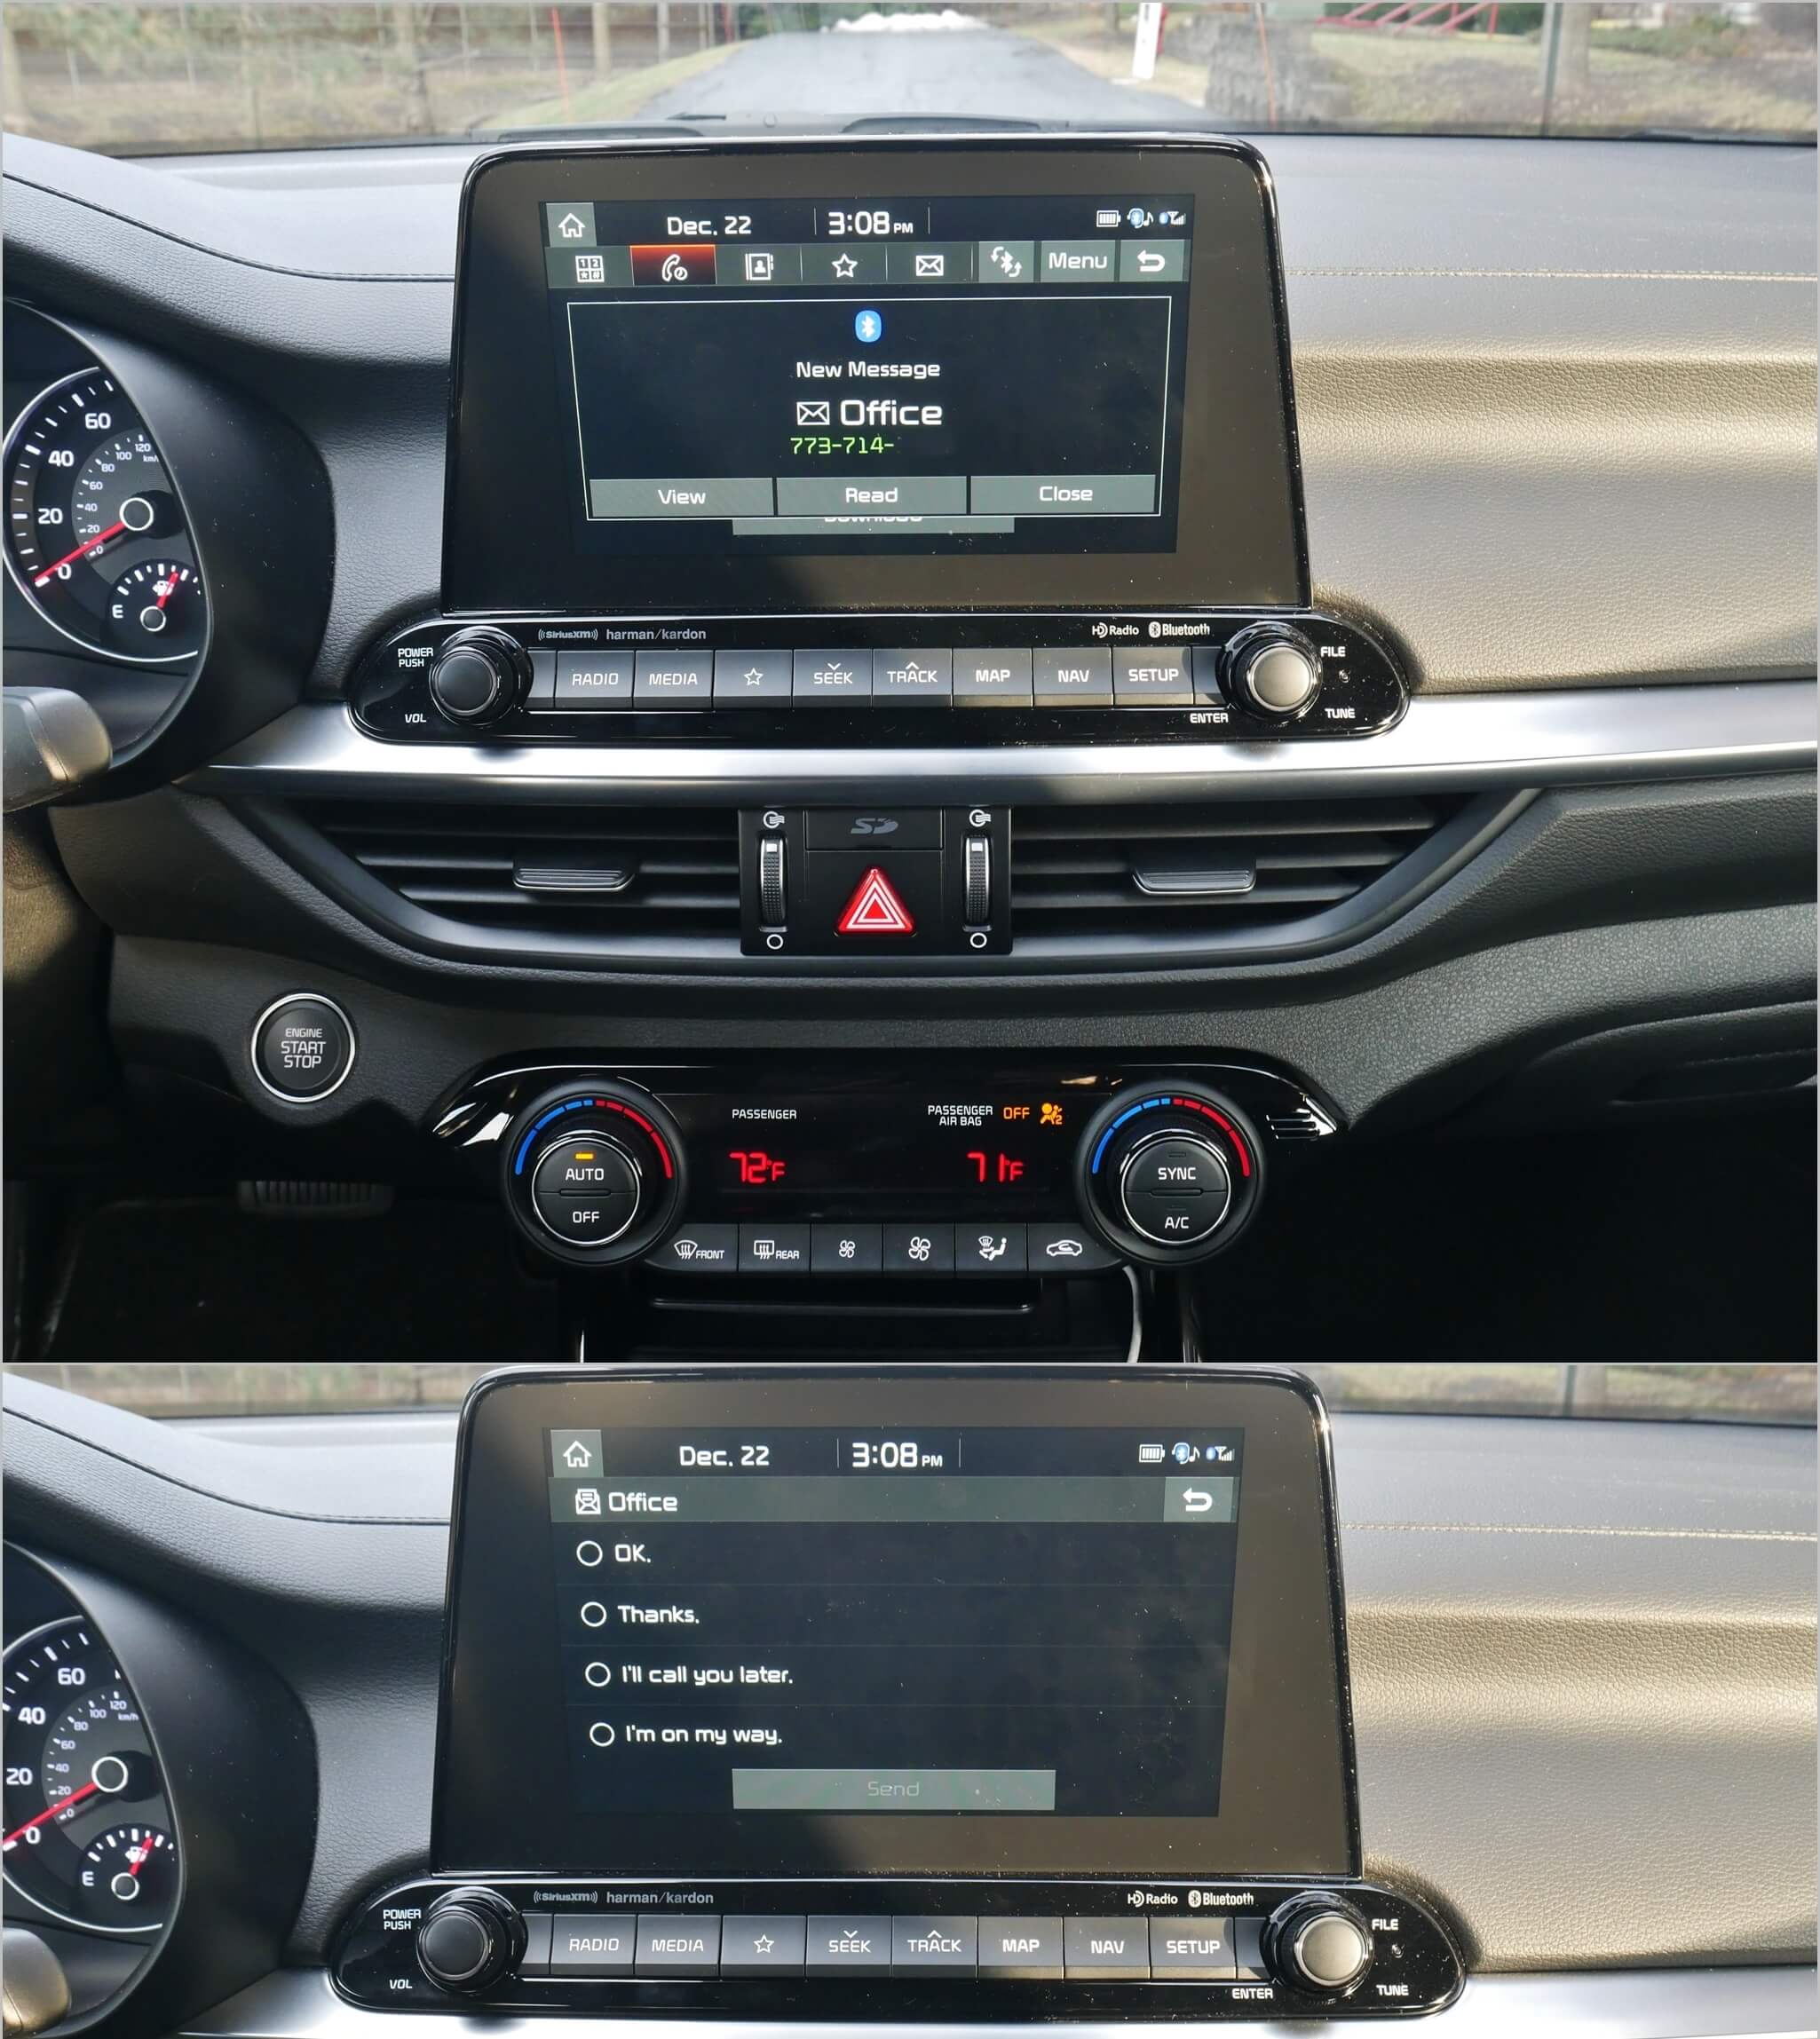 2019 Kia Forte EX: native SMS text messaging finally arrives, albeit only displaying unread messages and w/ limited pre-selected responses